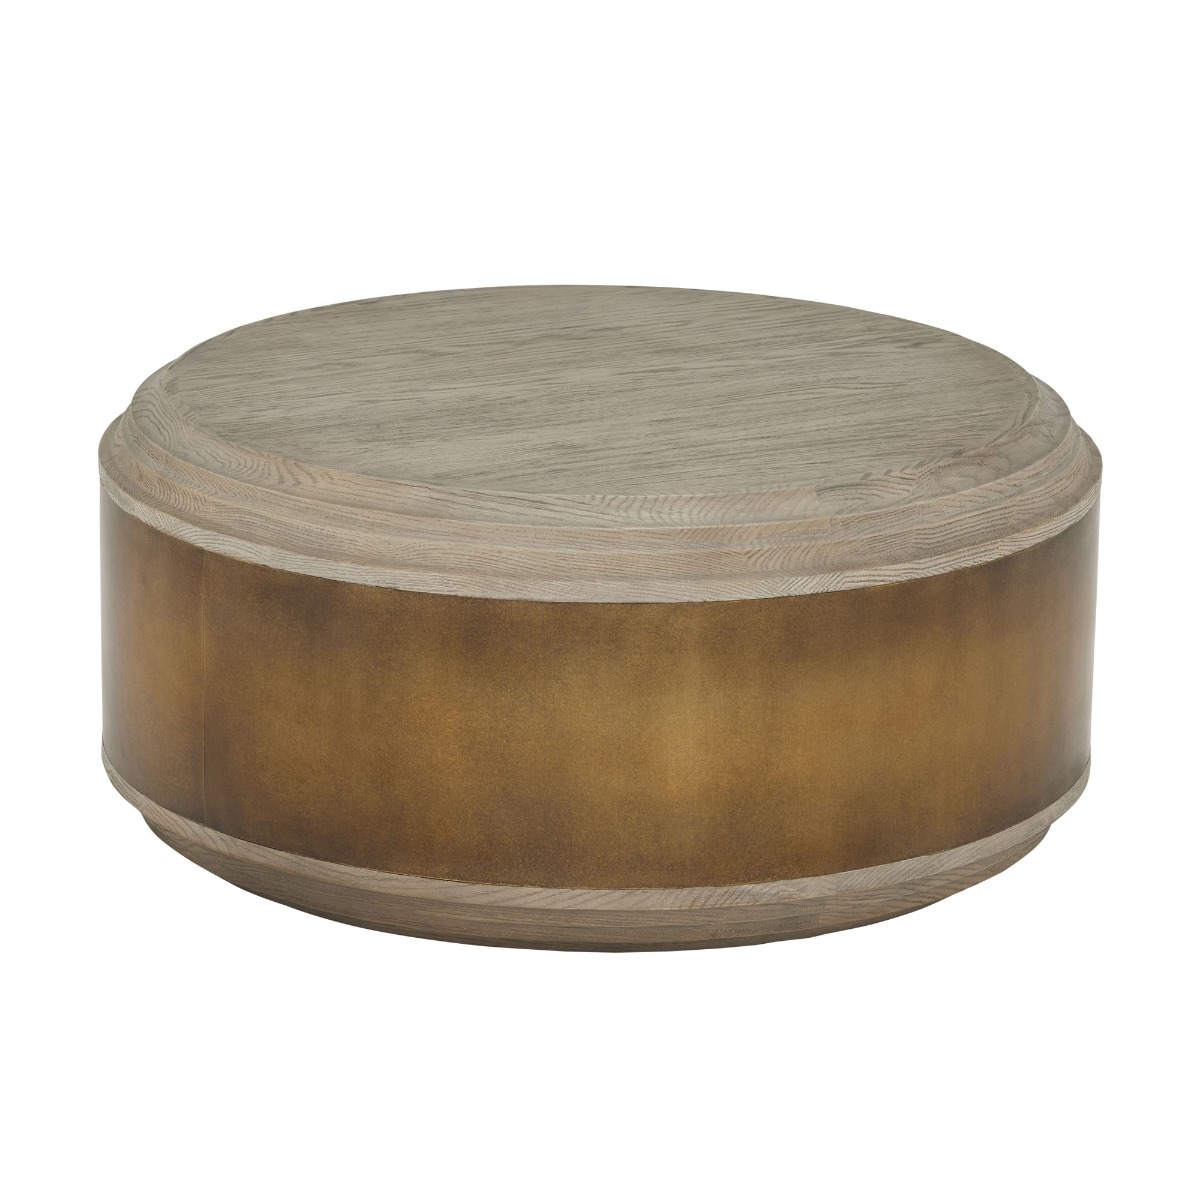 Dionne Round Coffee Table, Round, Brown | Barker & Stonehouse